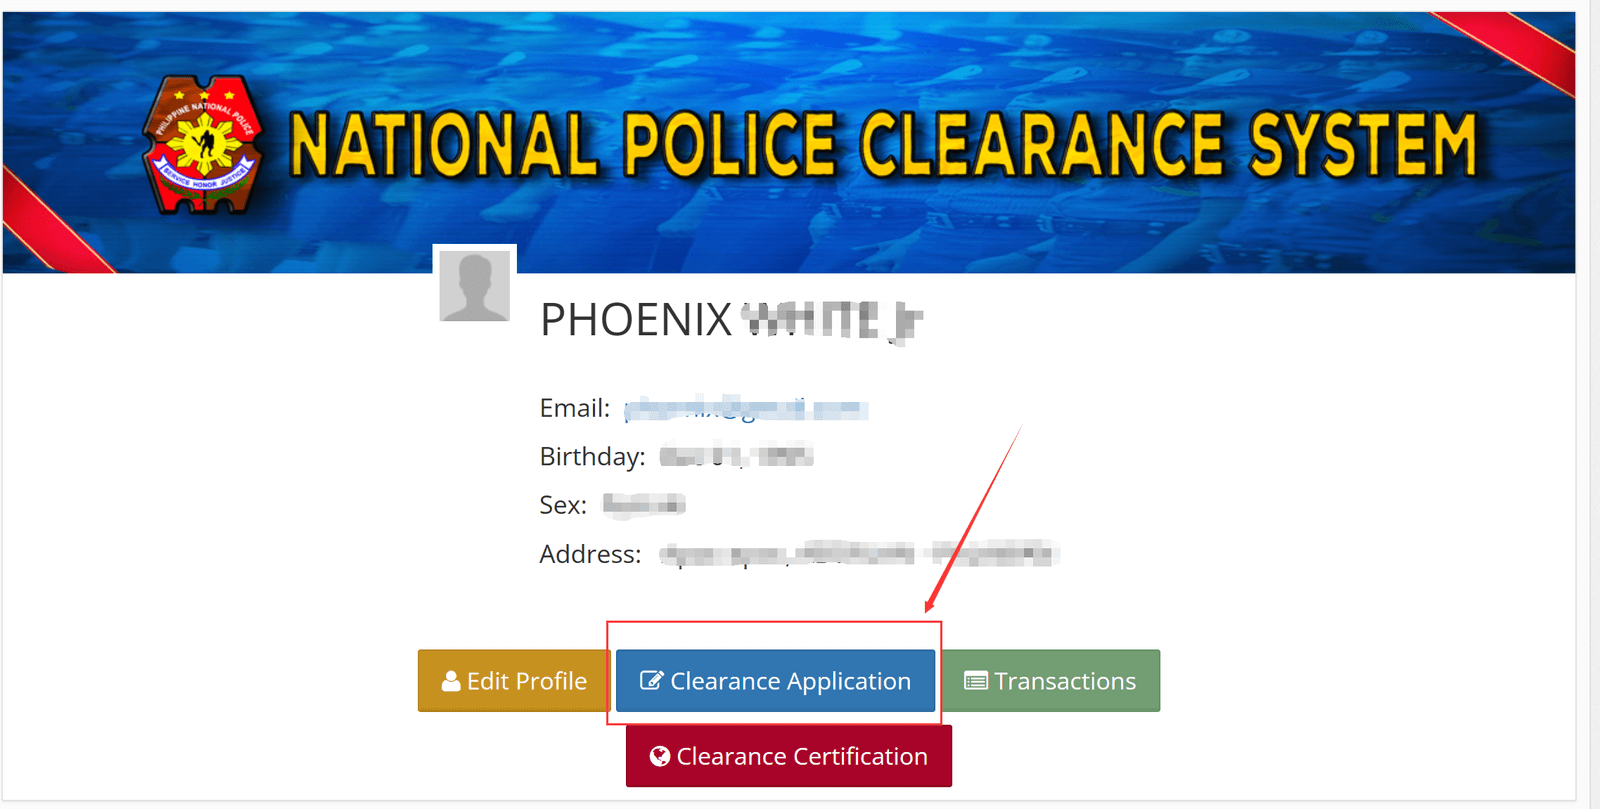 schedule a clearance application appointment